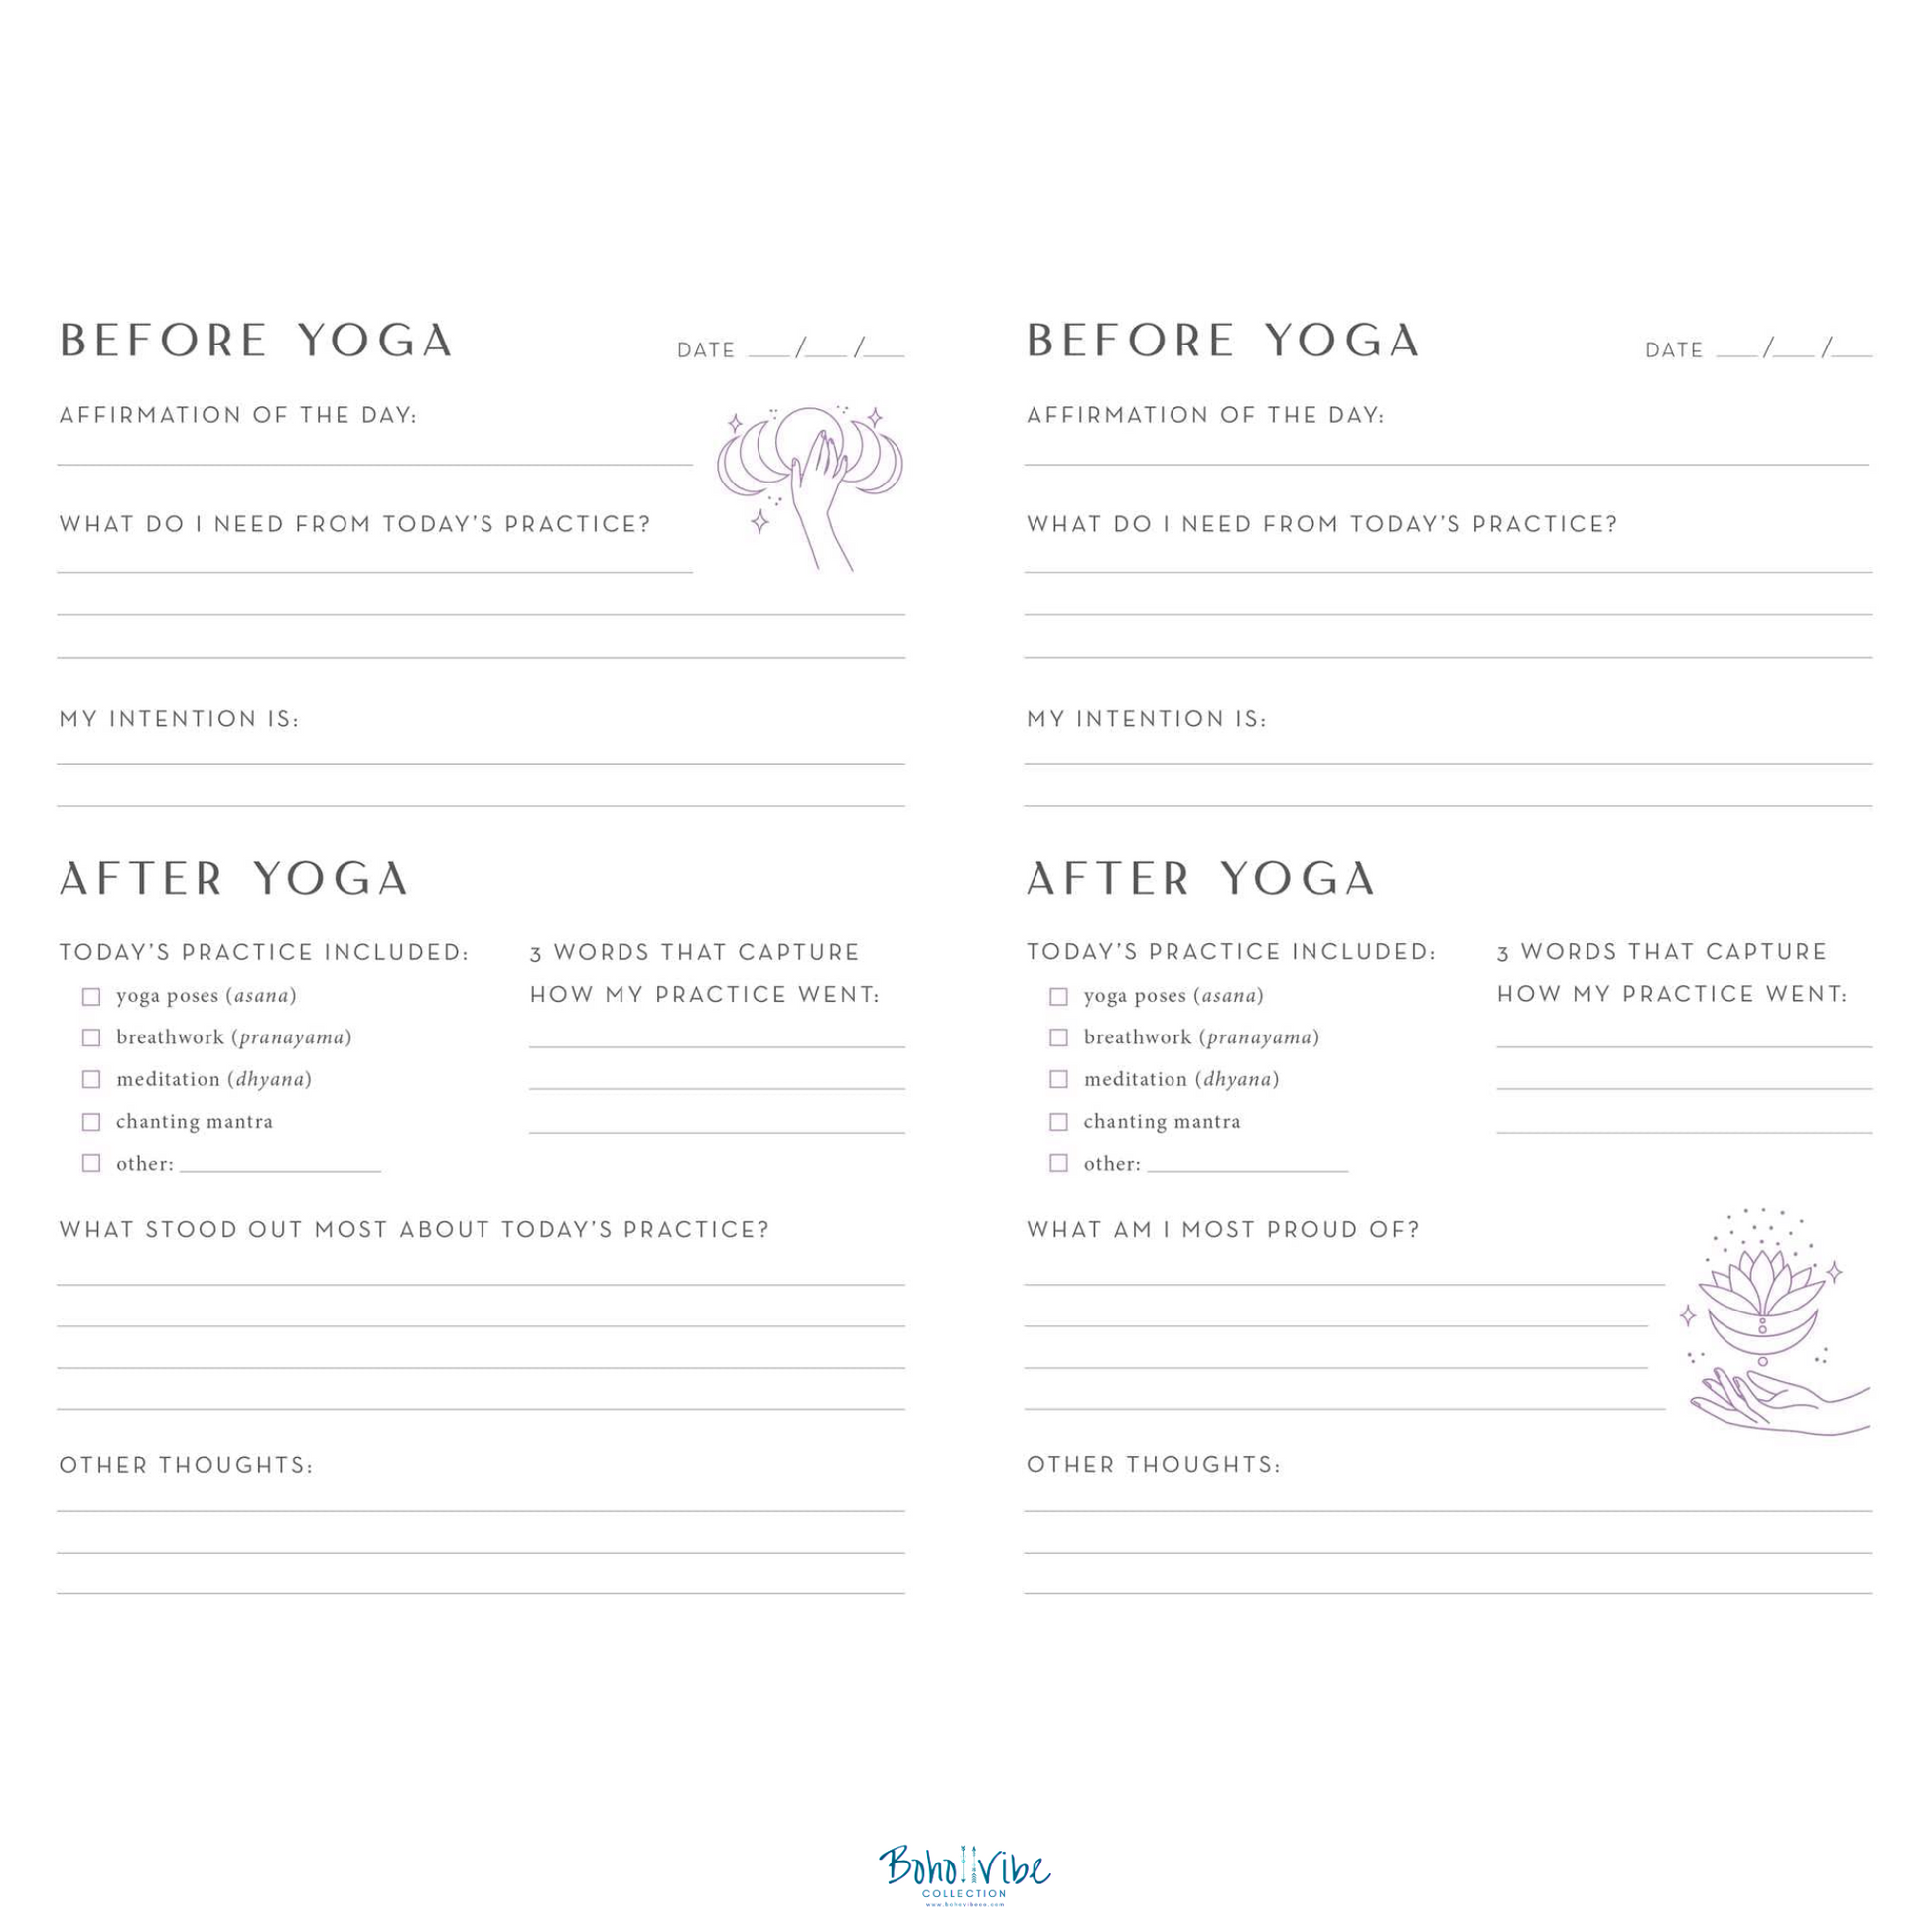 Boho ↡↟ Vibe Collection ↠ My Yoga Journey. A Guided Journal. Yoga Journal ↡